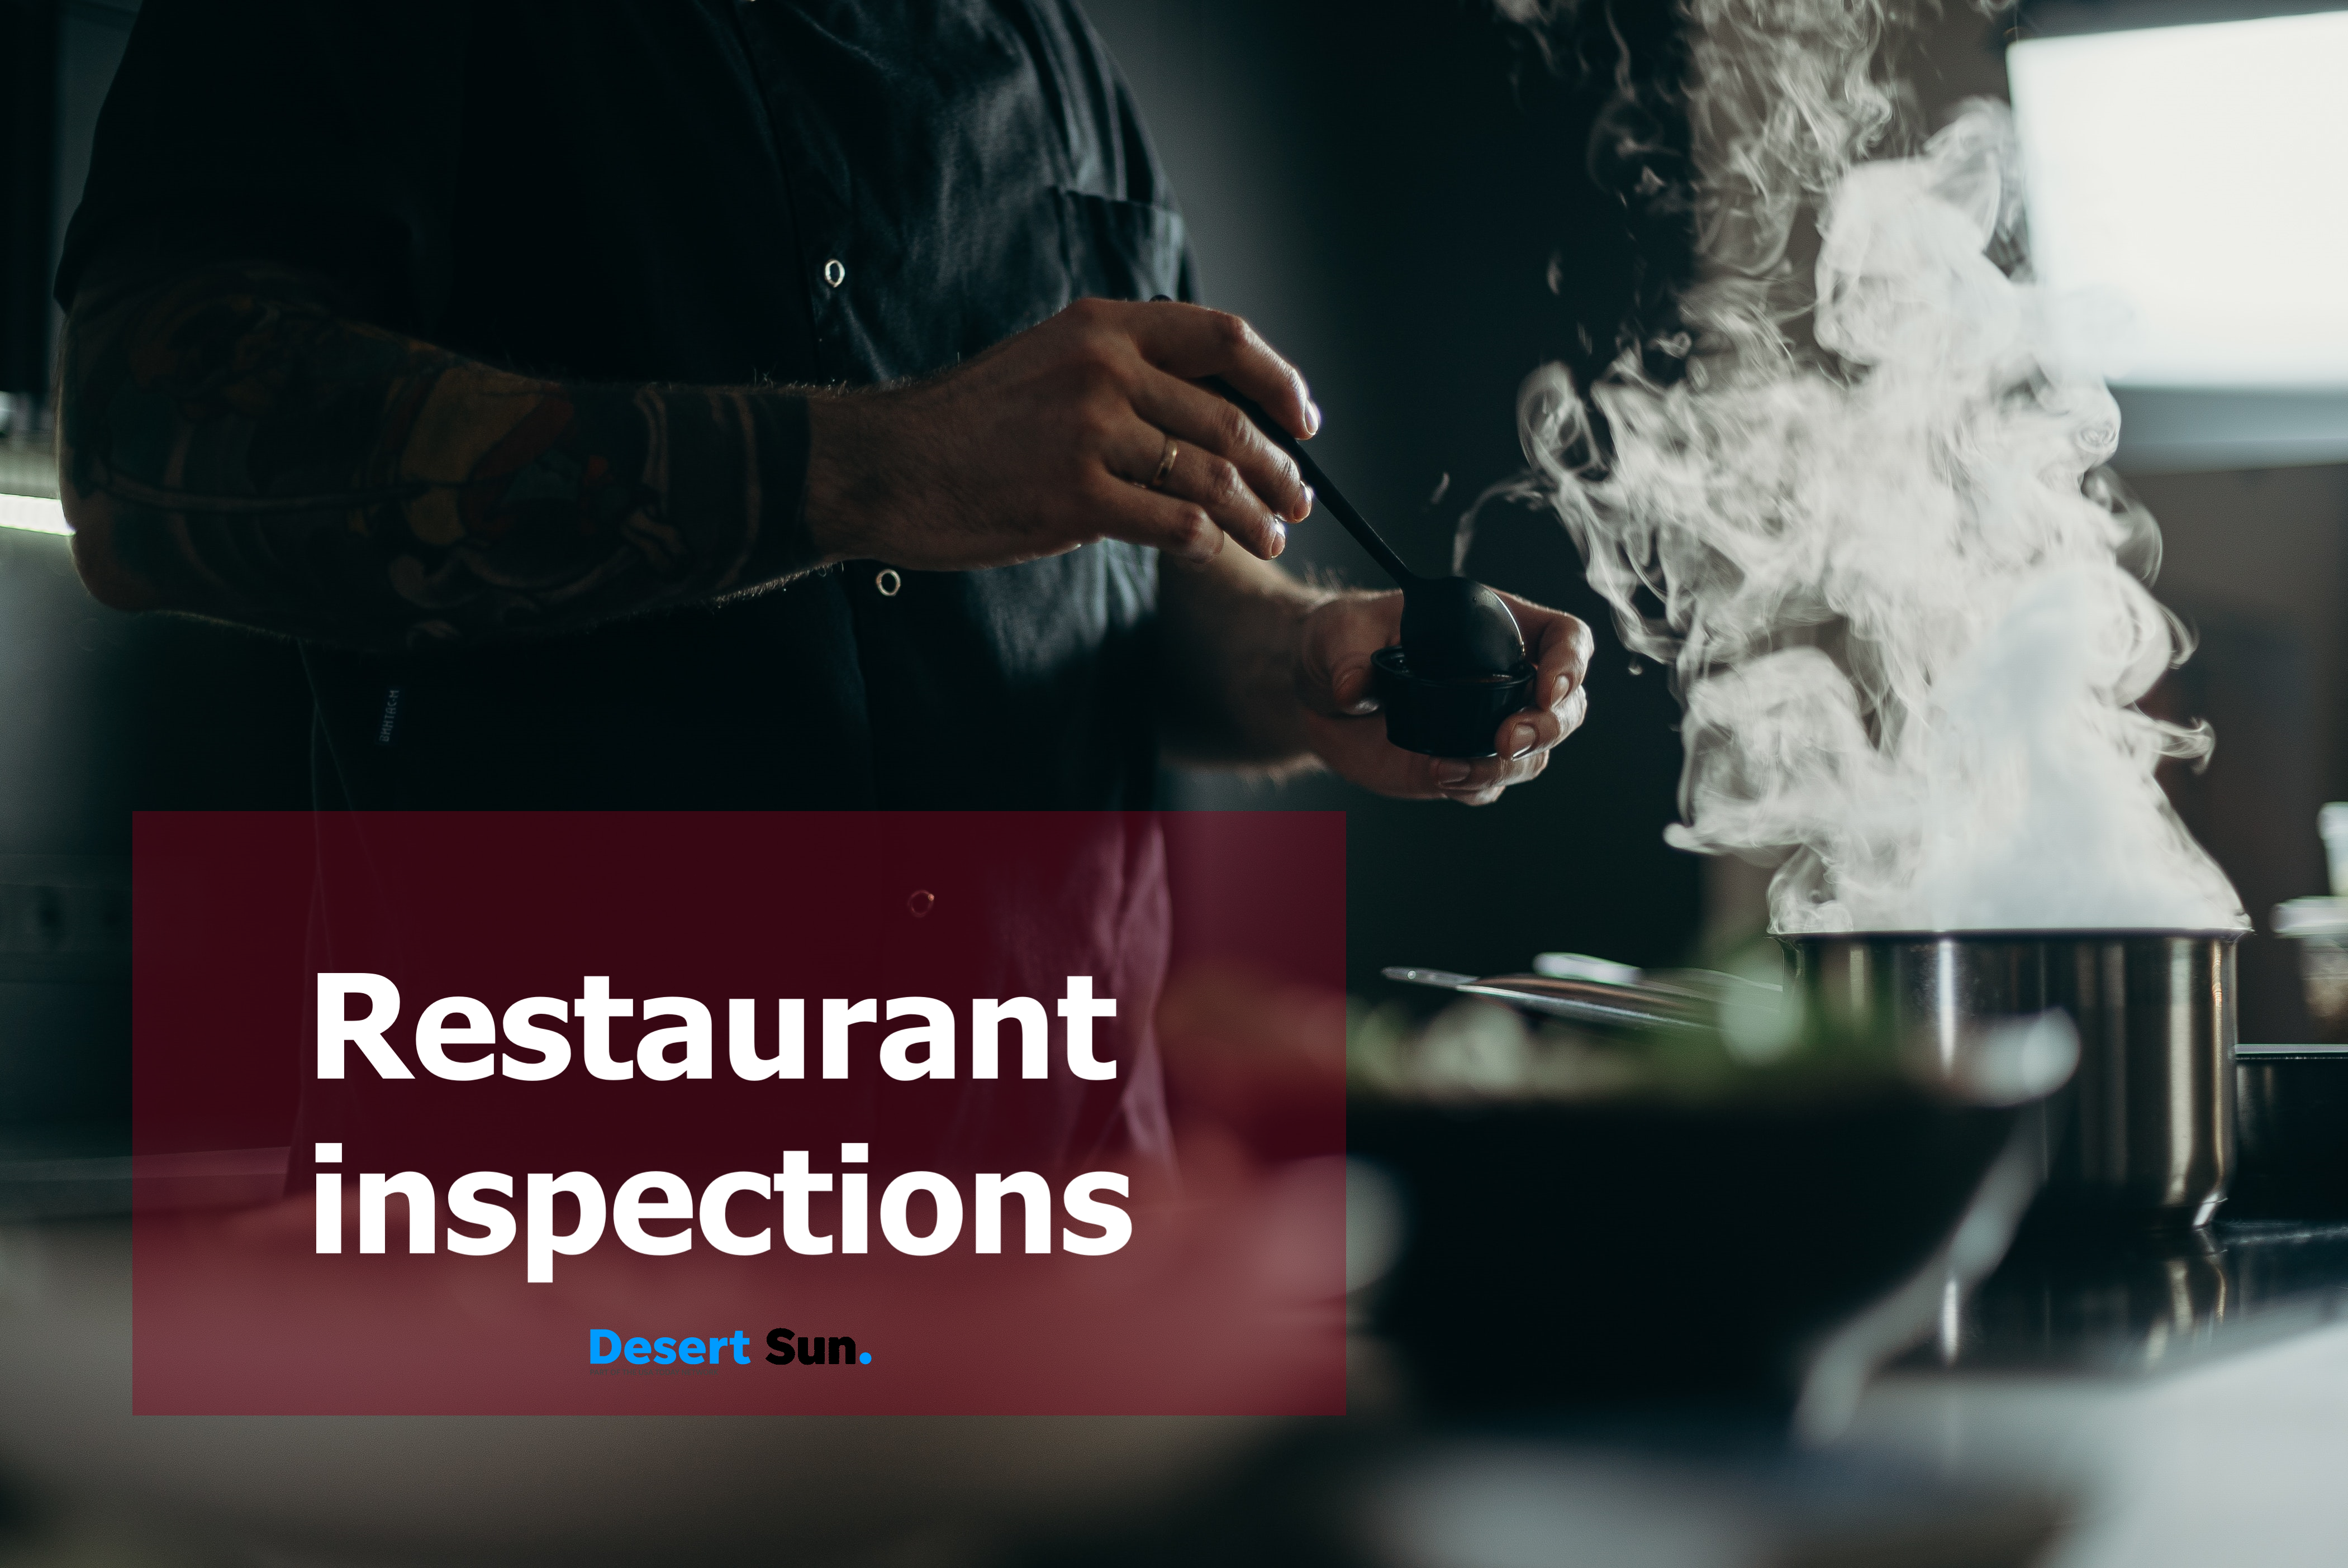 Restaurant inspections: Rodent infestation closes Cathedral City spot; 2 others score 'B'